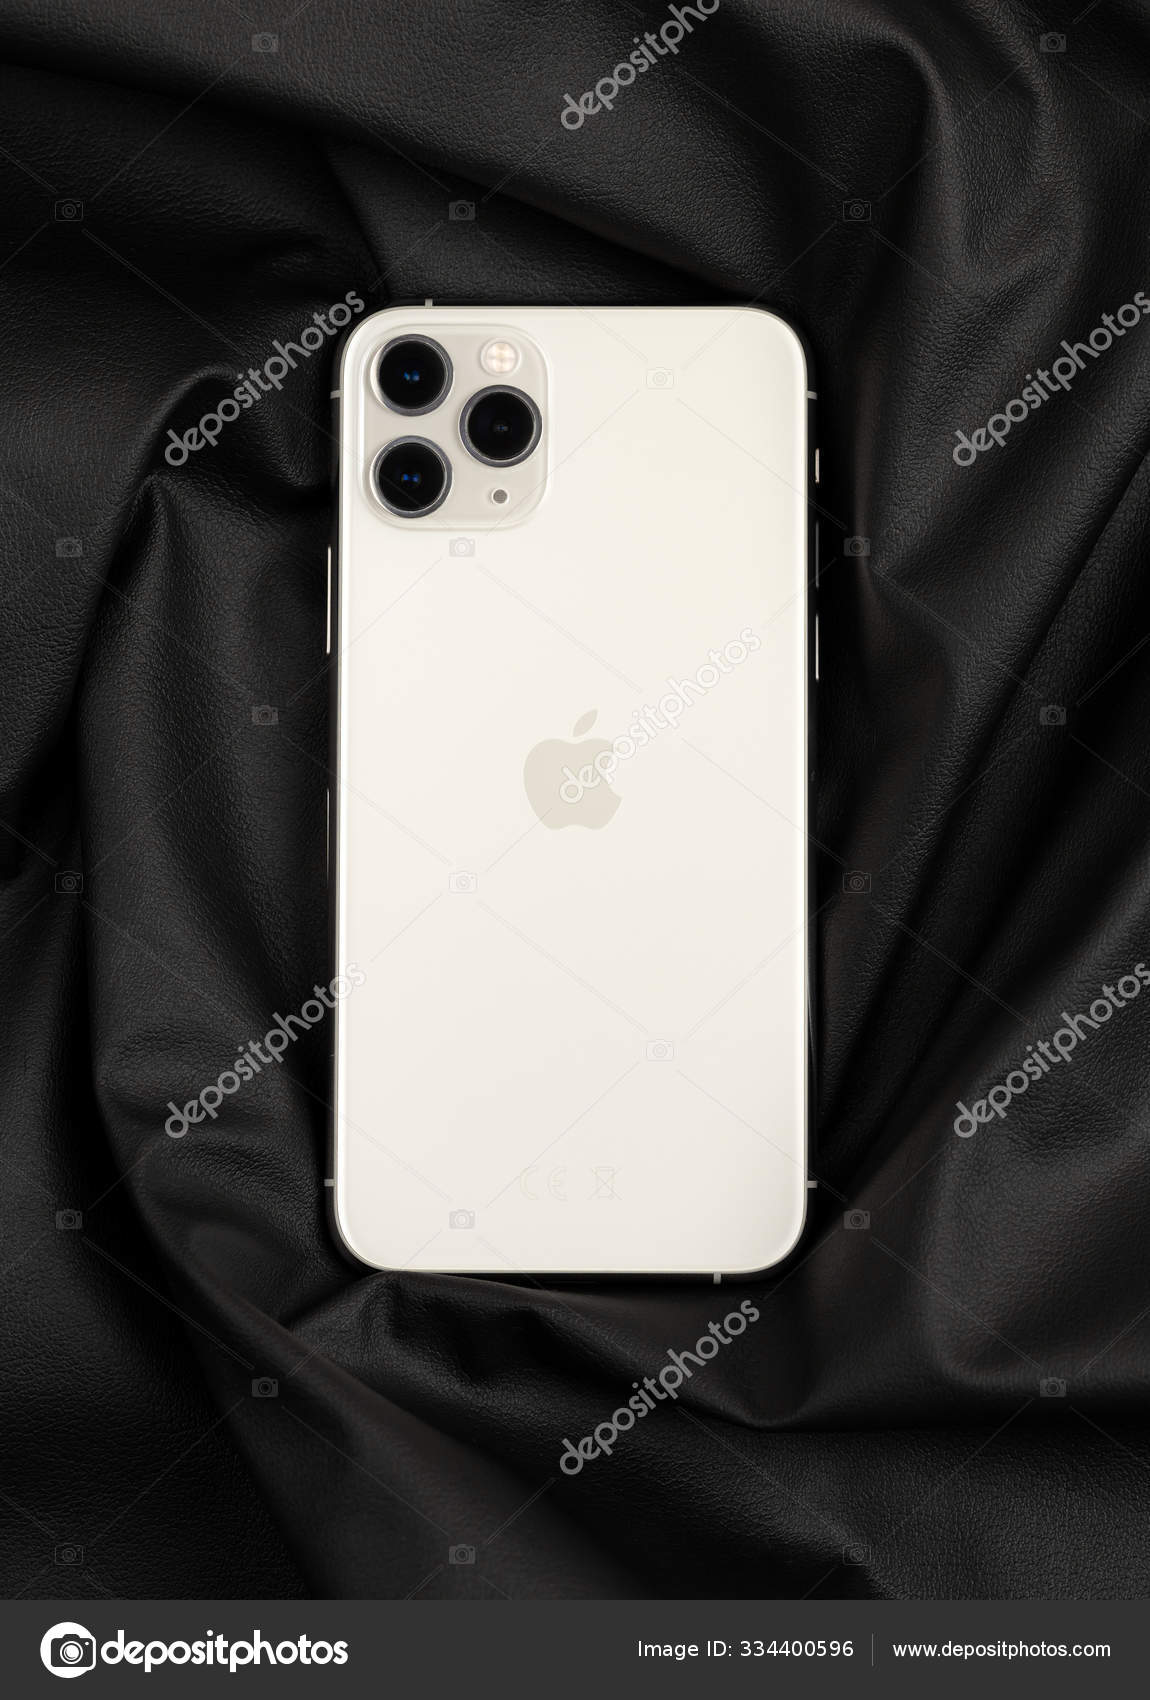 Apple Iphone 11 Pro Silver Color On A Black Leather Surface Stock Editorial Photo C Seremin